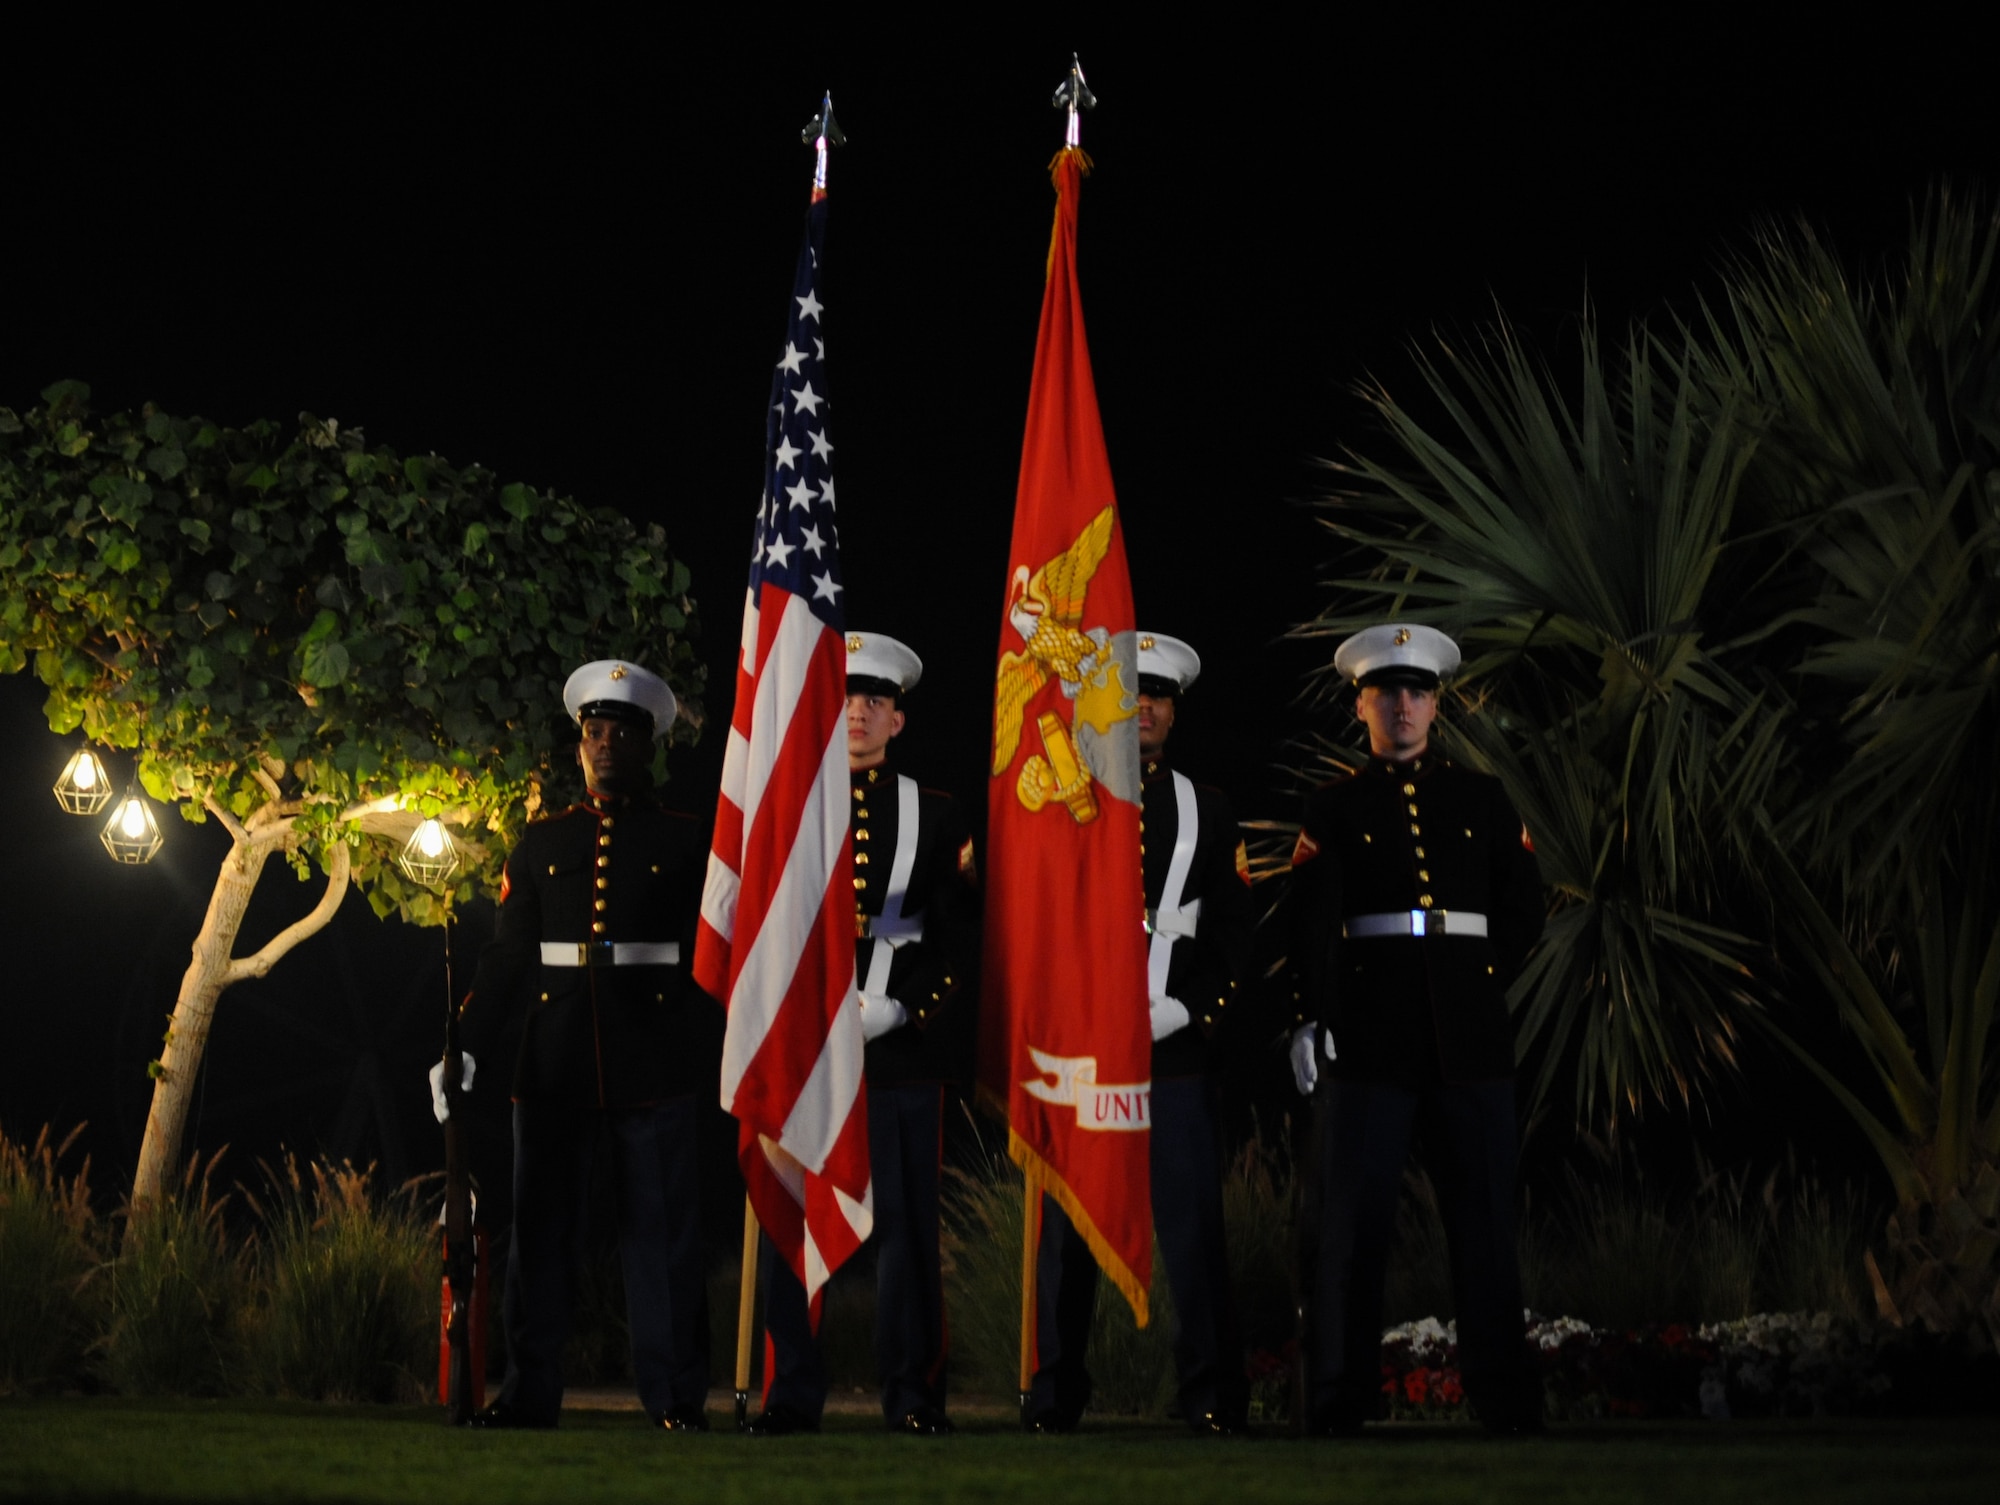 U.S. Marines deployed to the United Arab Emirates present the U.S. Flag during the U.S. National Day March 7, 2018 at the Ritz-Carlton Hotel and Resort, Dubai. The United States Independence Day is celebrated in the early months of the year for citizens to take advantage of cooler weather. (U.S. Air National Guard Photo by Staff Sgt. Colton Elliott)